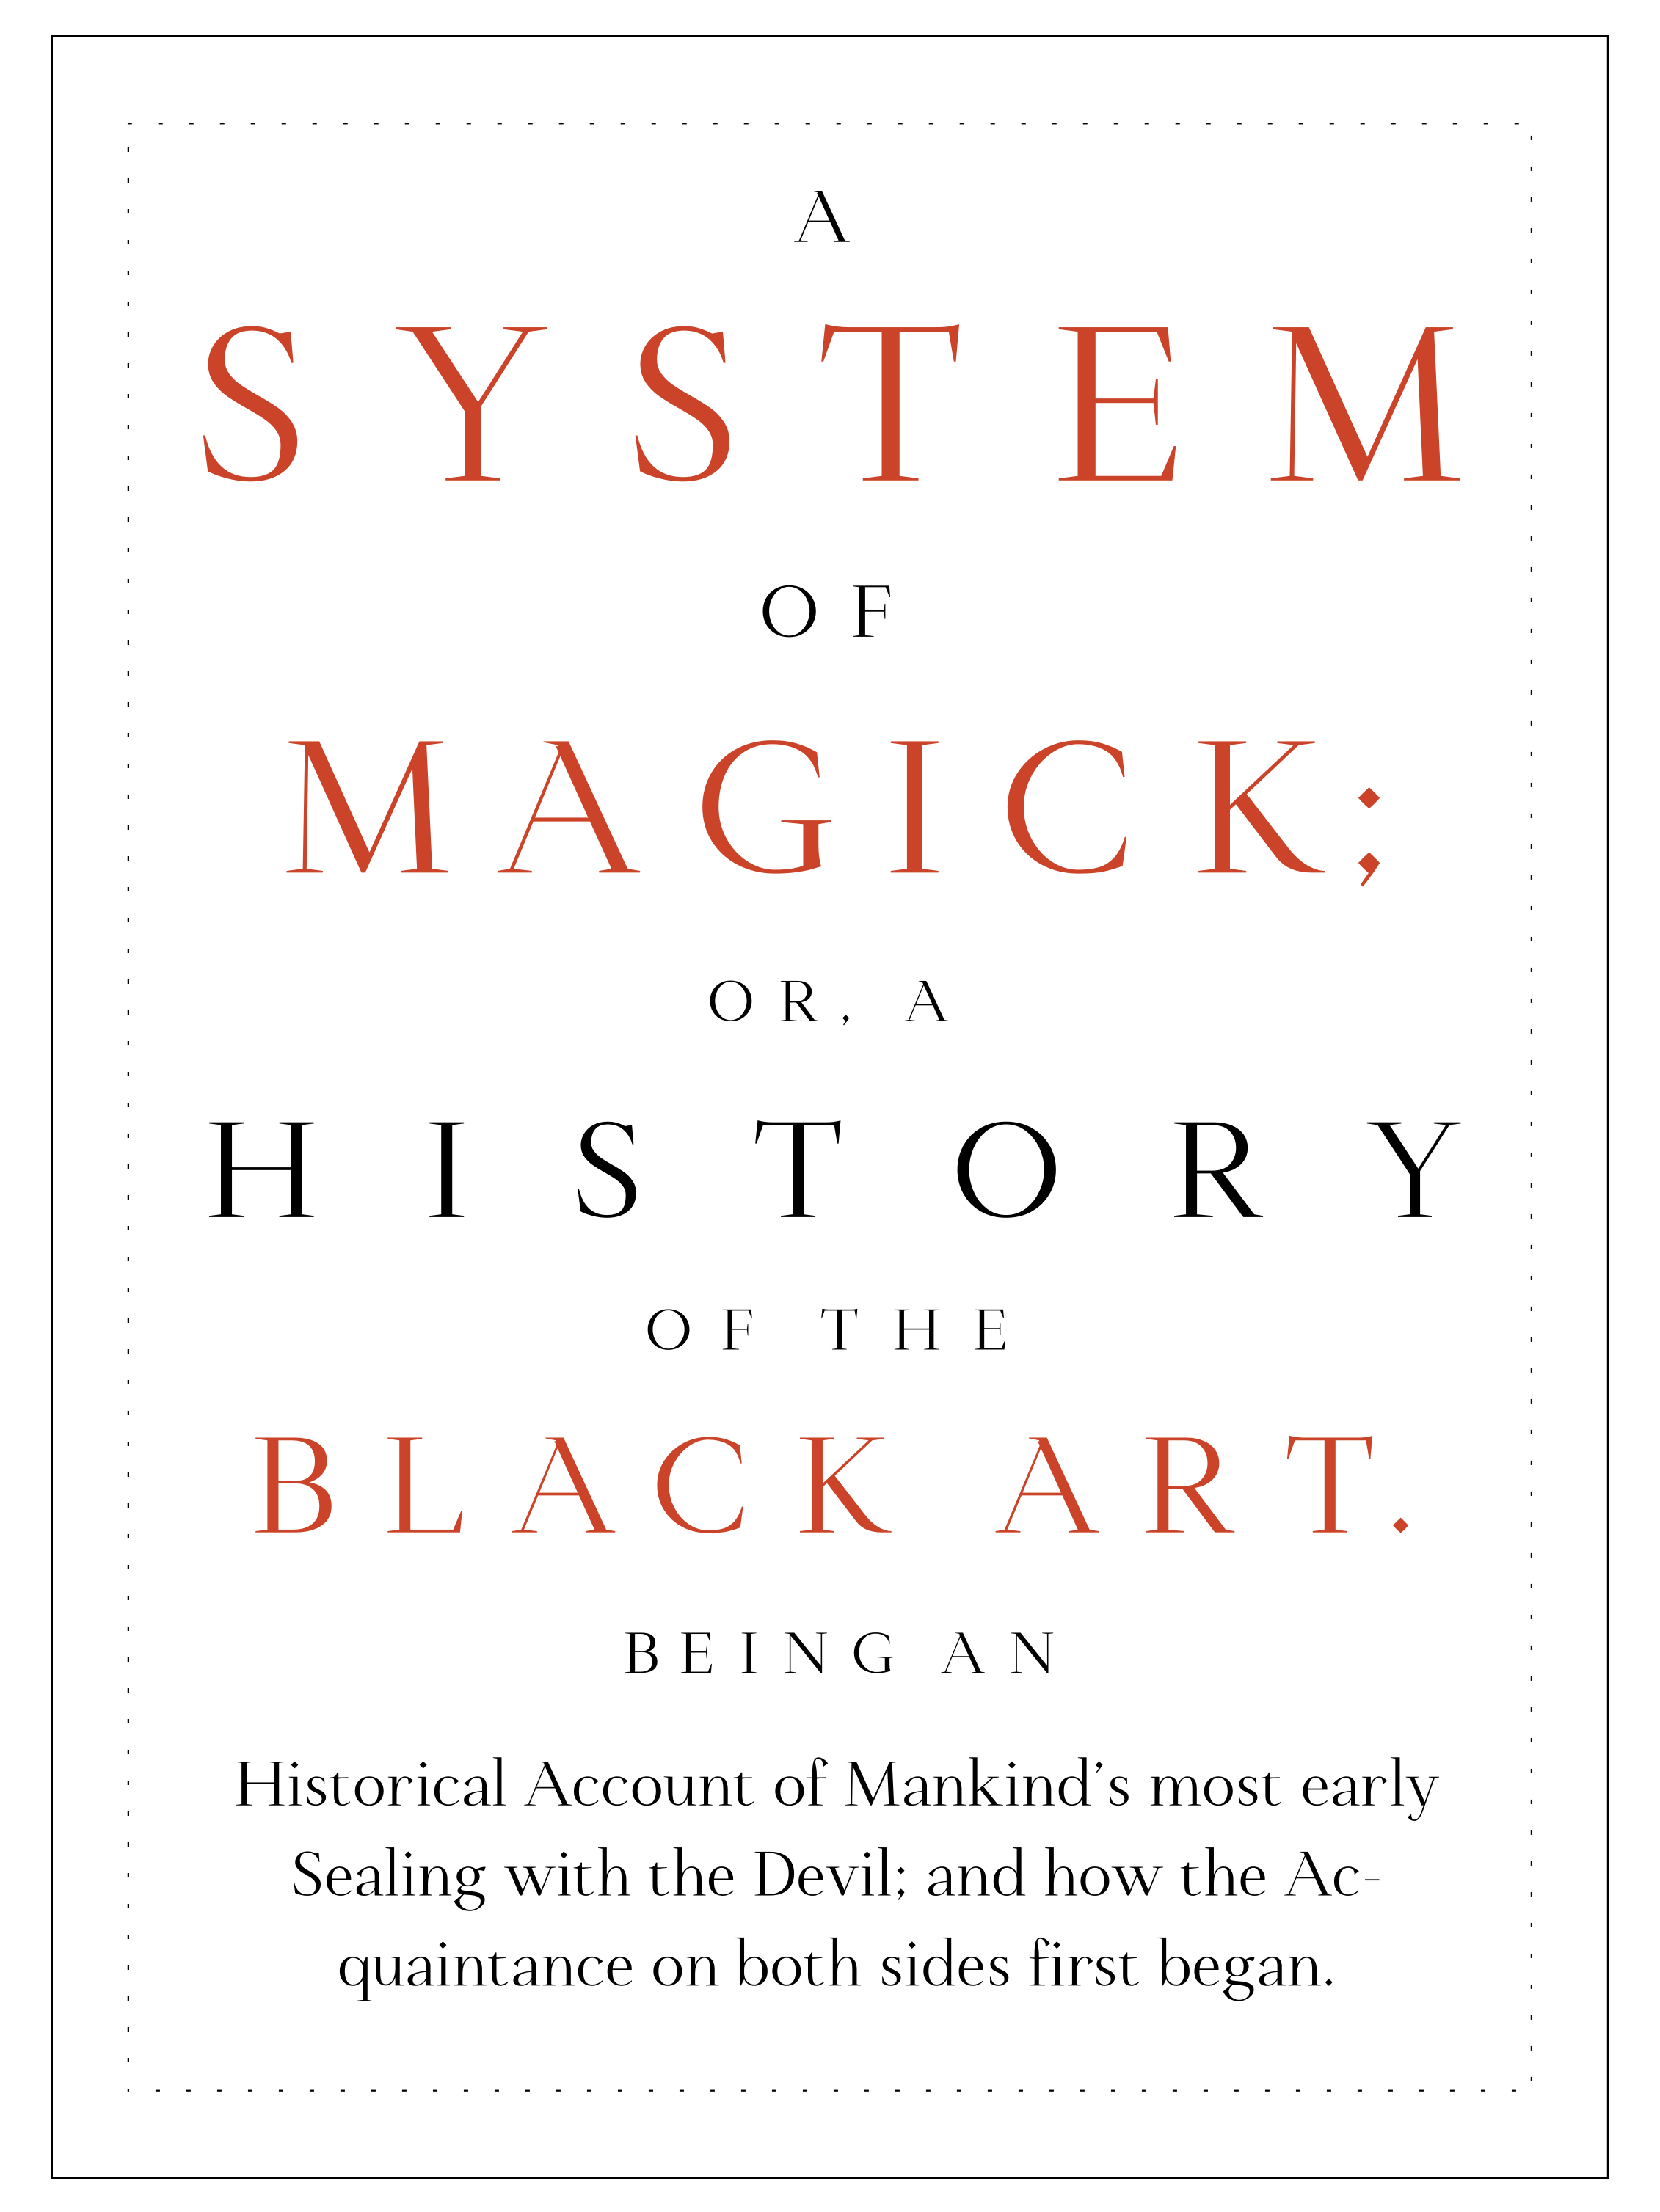 A recreation of the full title of the book A System of Magick typeset in the font Witchy